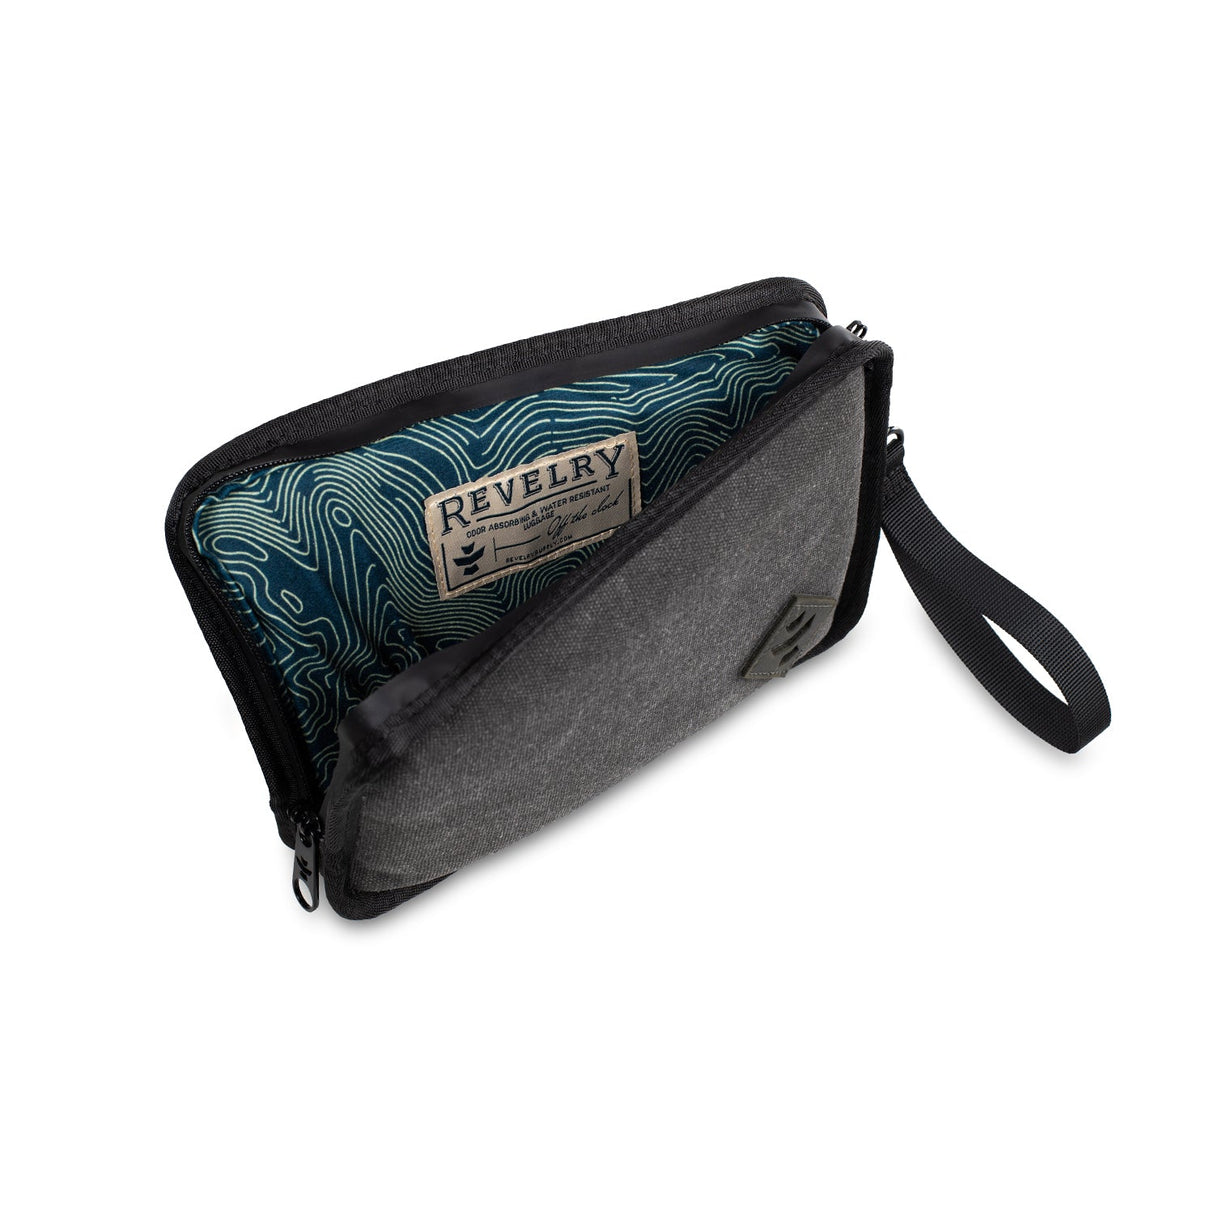 Revelry Supply 'The Gordo' Smell Proof Padded Pouch - Angled View on White